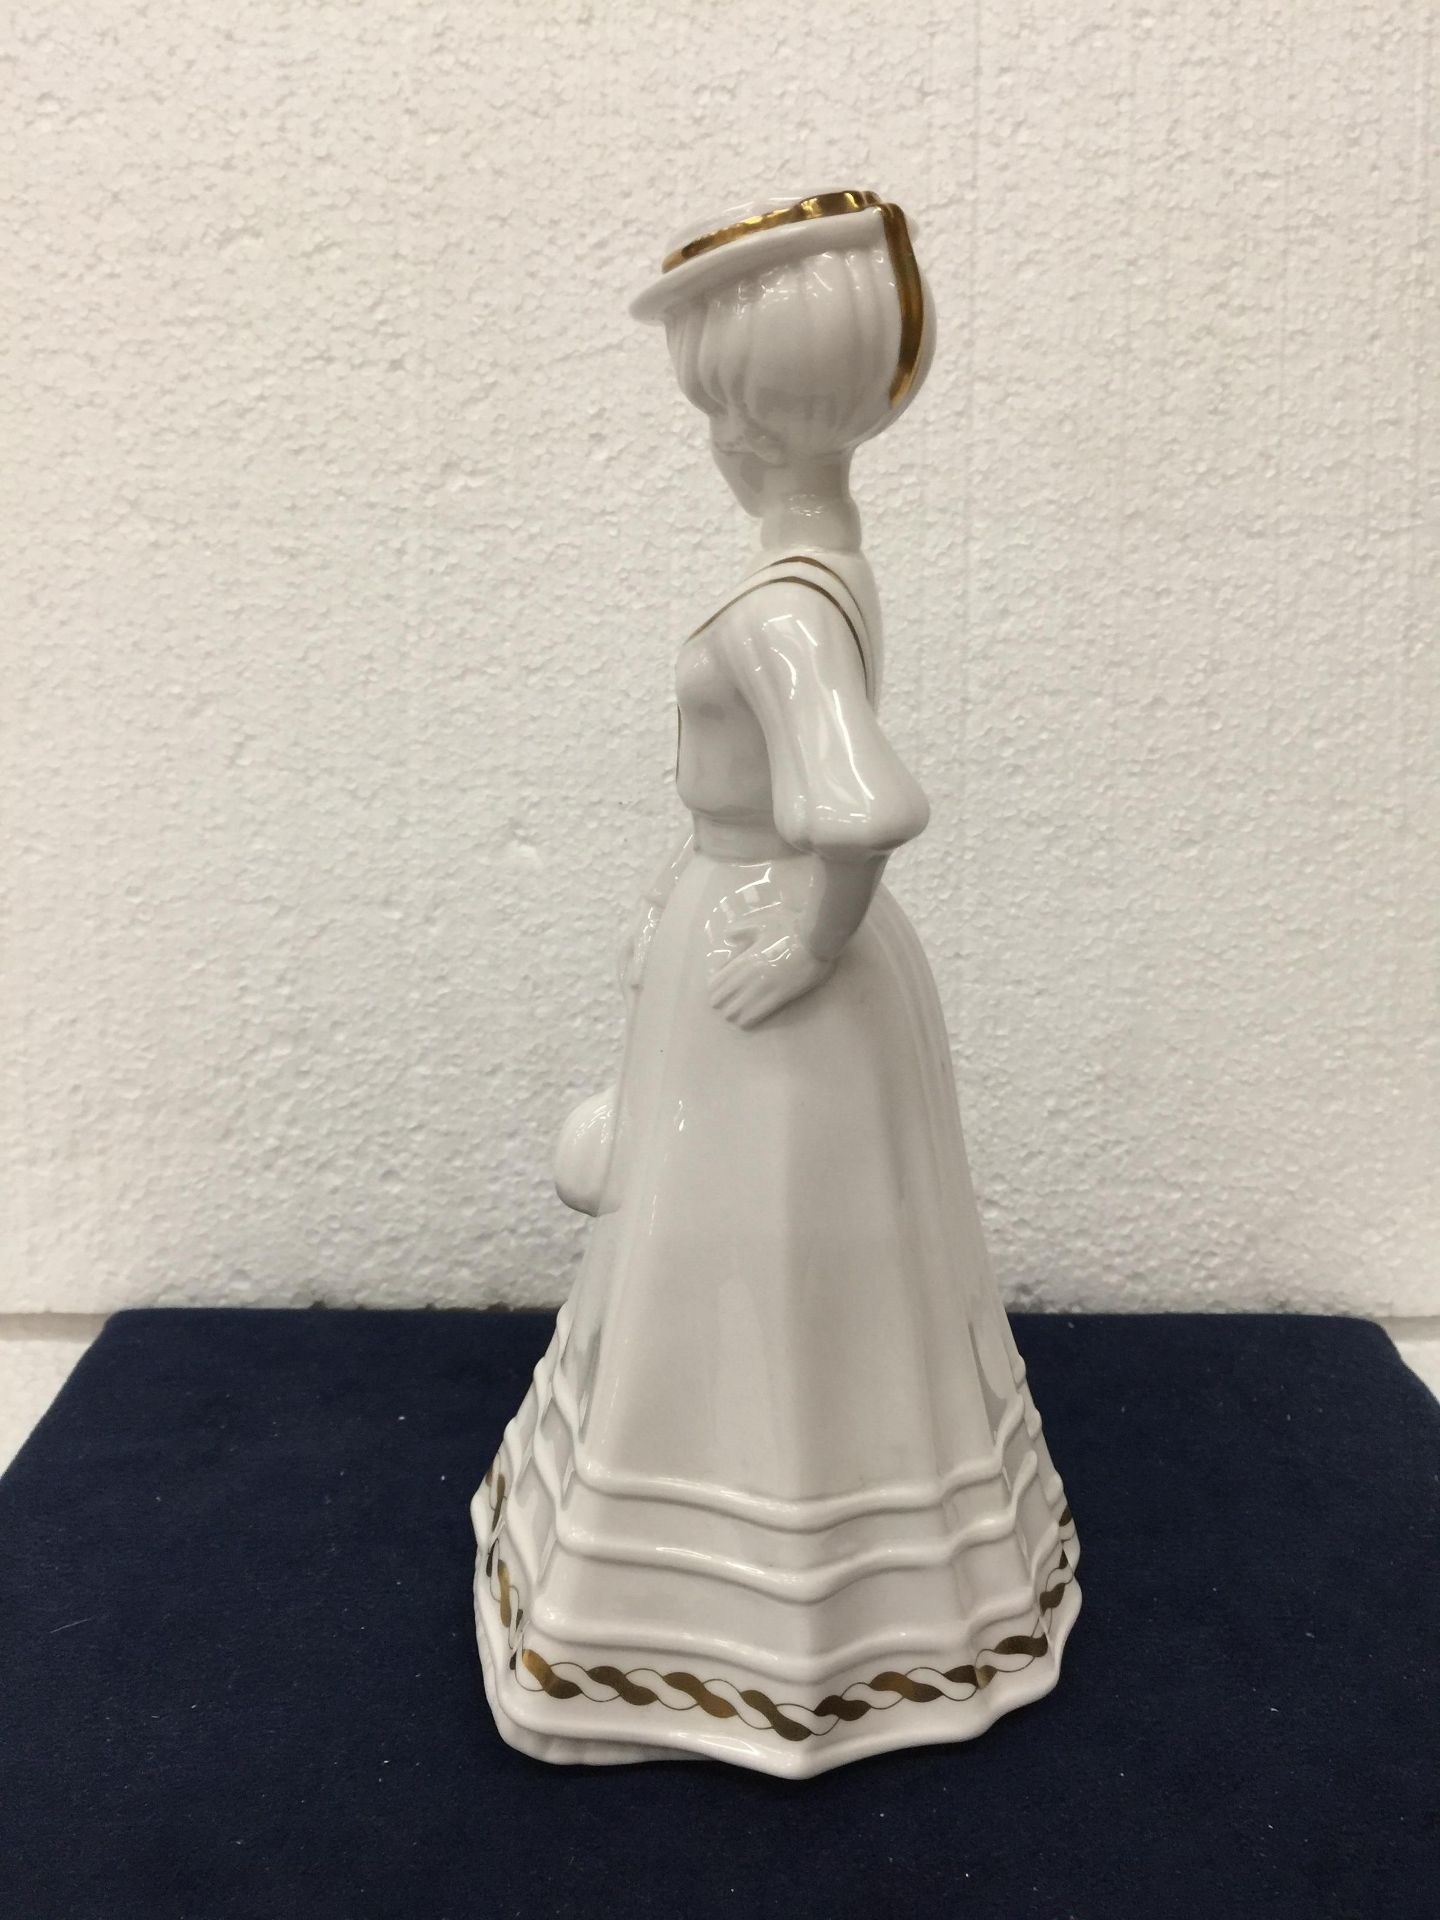 A SPODE FIGURINE "LILY" BY PAULINE SHONE IN GLOSS - 24CM (H) - Image 6 of 7